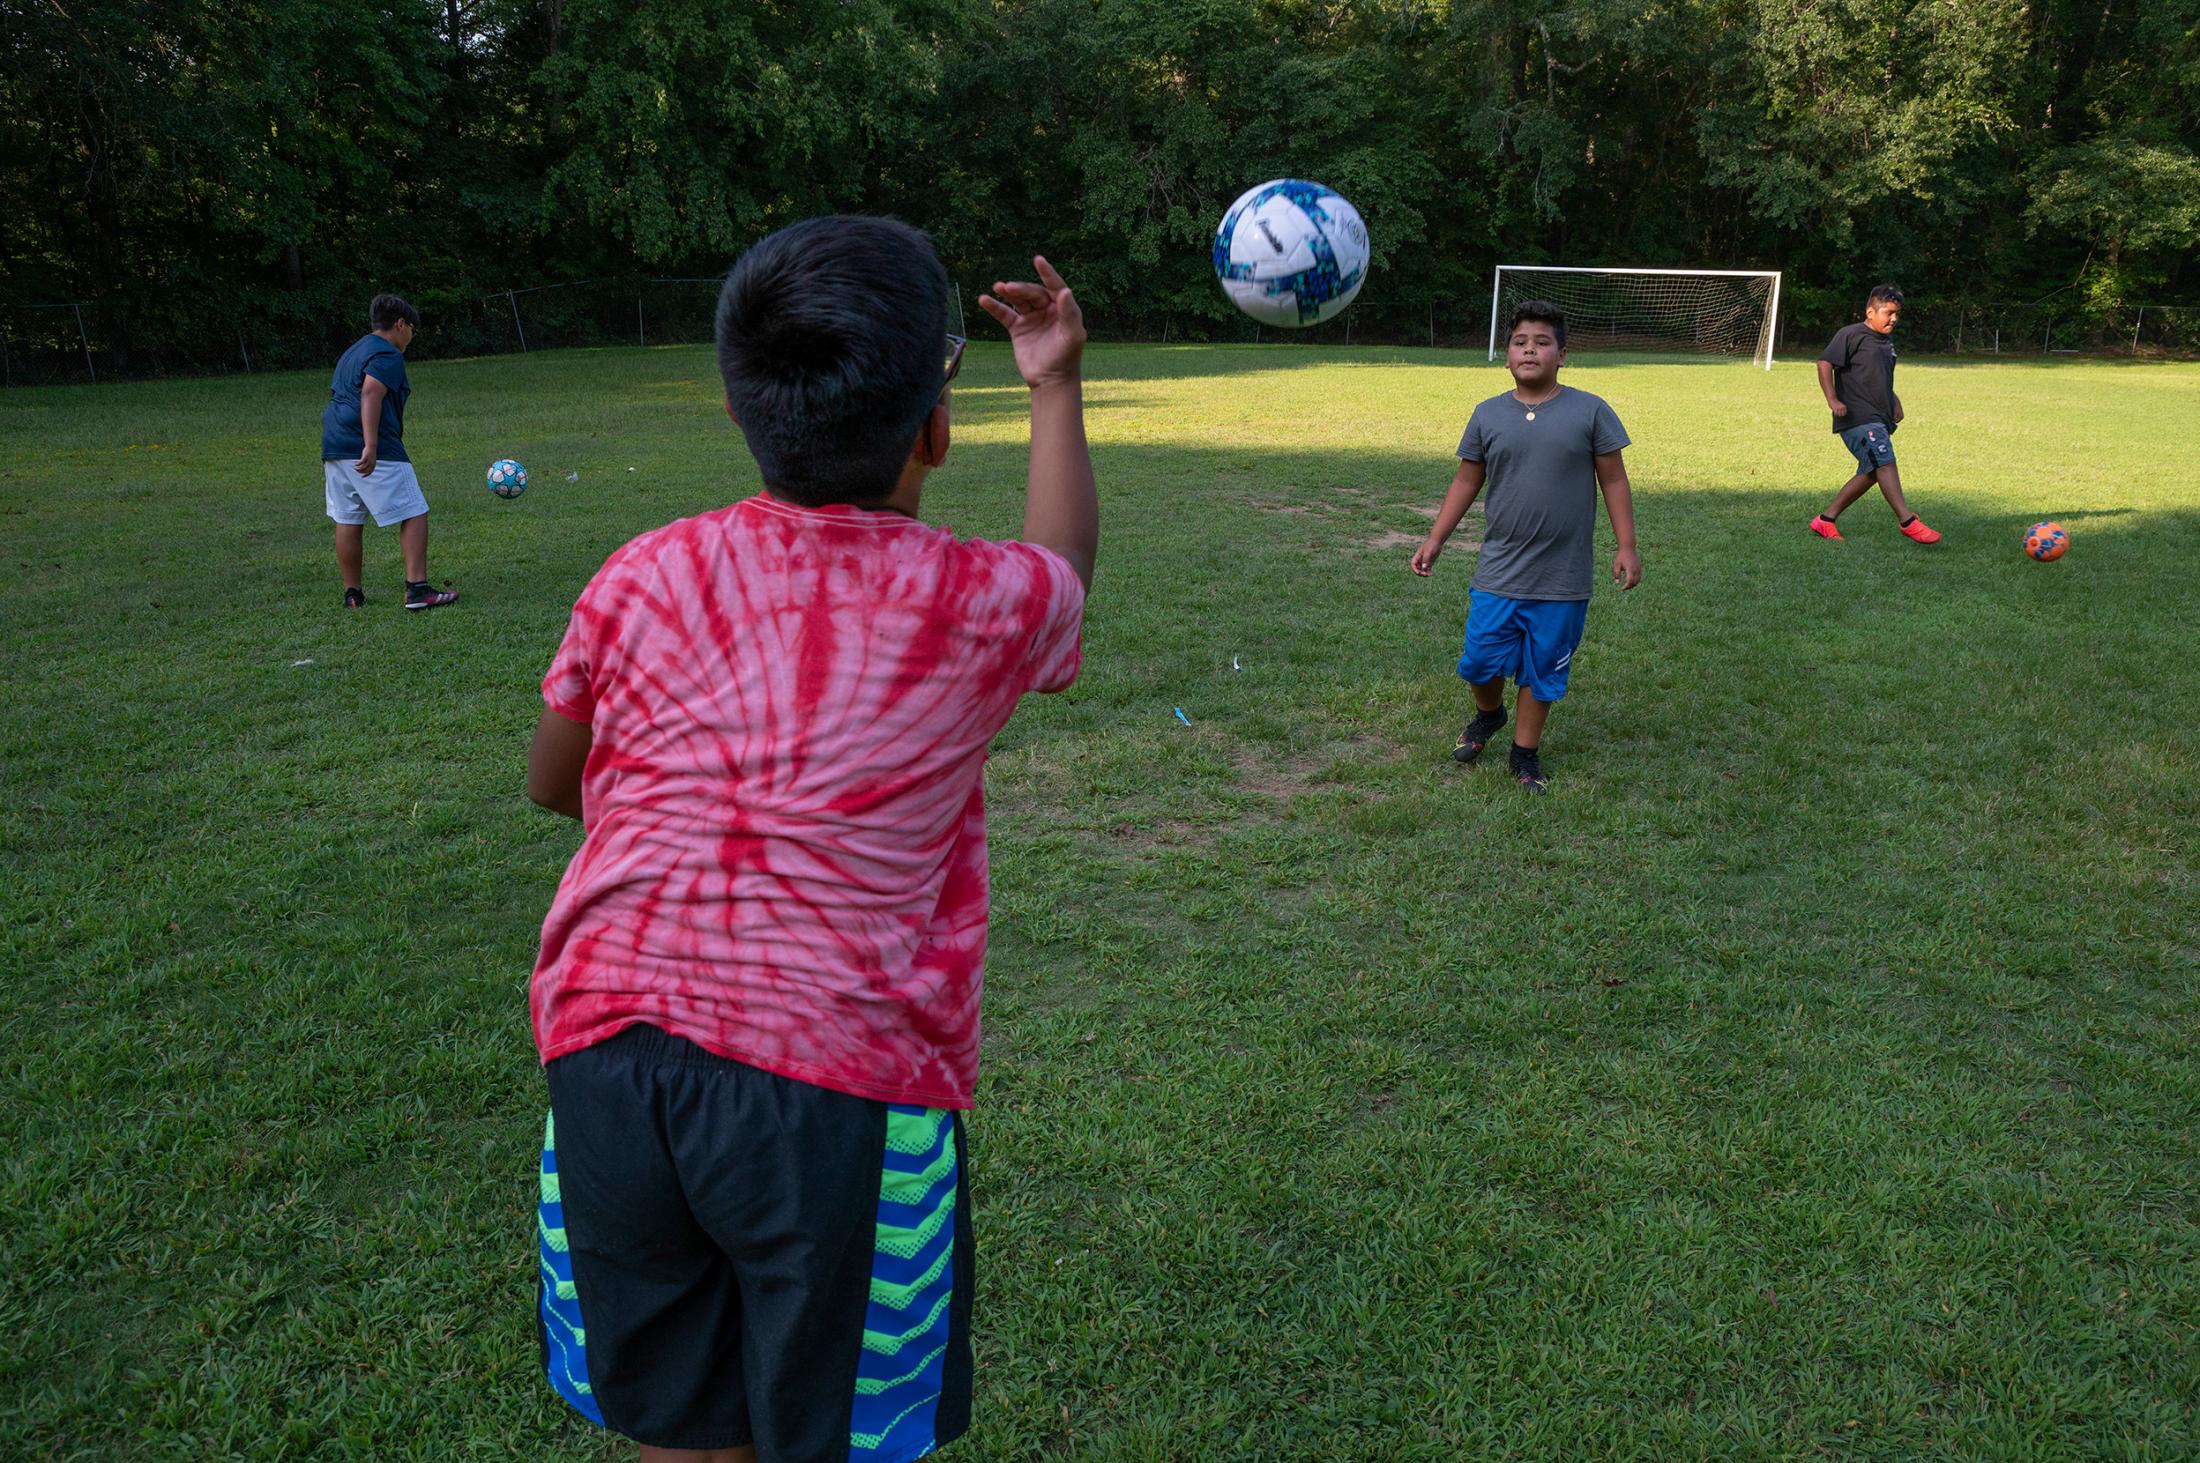  Landmark Chruch&rsquo;s youth soccer team practices drills at Jones Bridge Park near the river to prepare for an upcoming game. Recreation is a big part of the public connection to Chattahoochee; In 2020, 3.1 million people visited the National Park. 